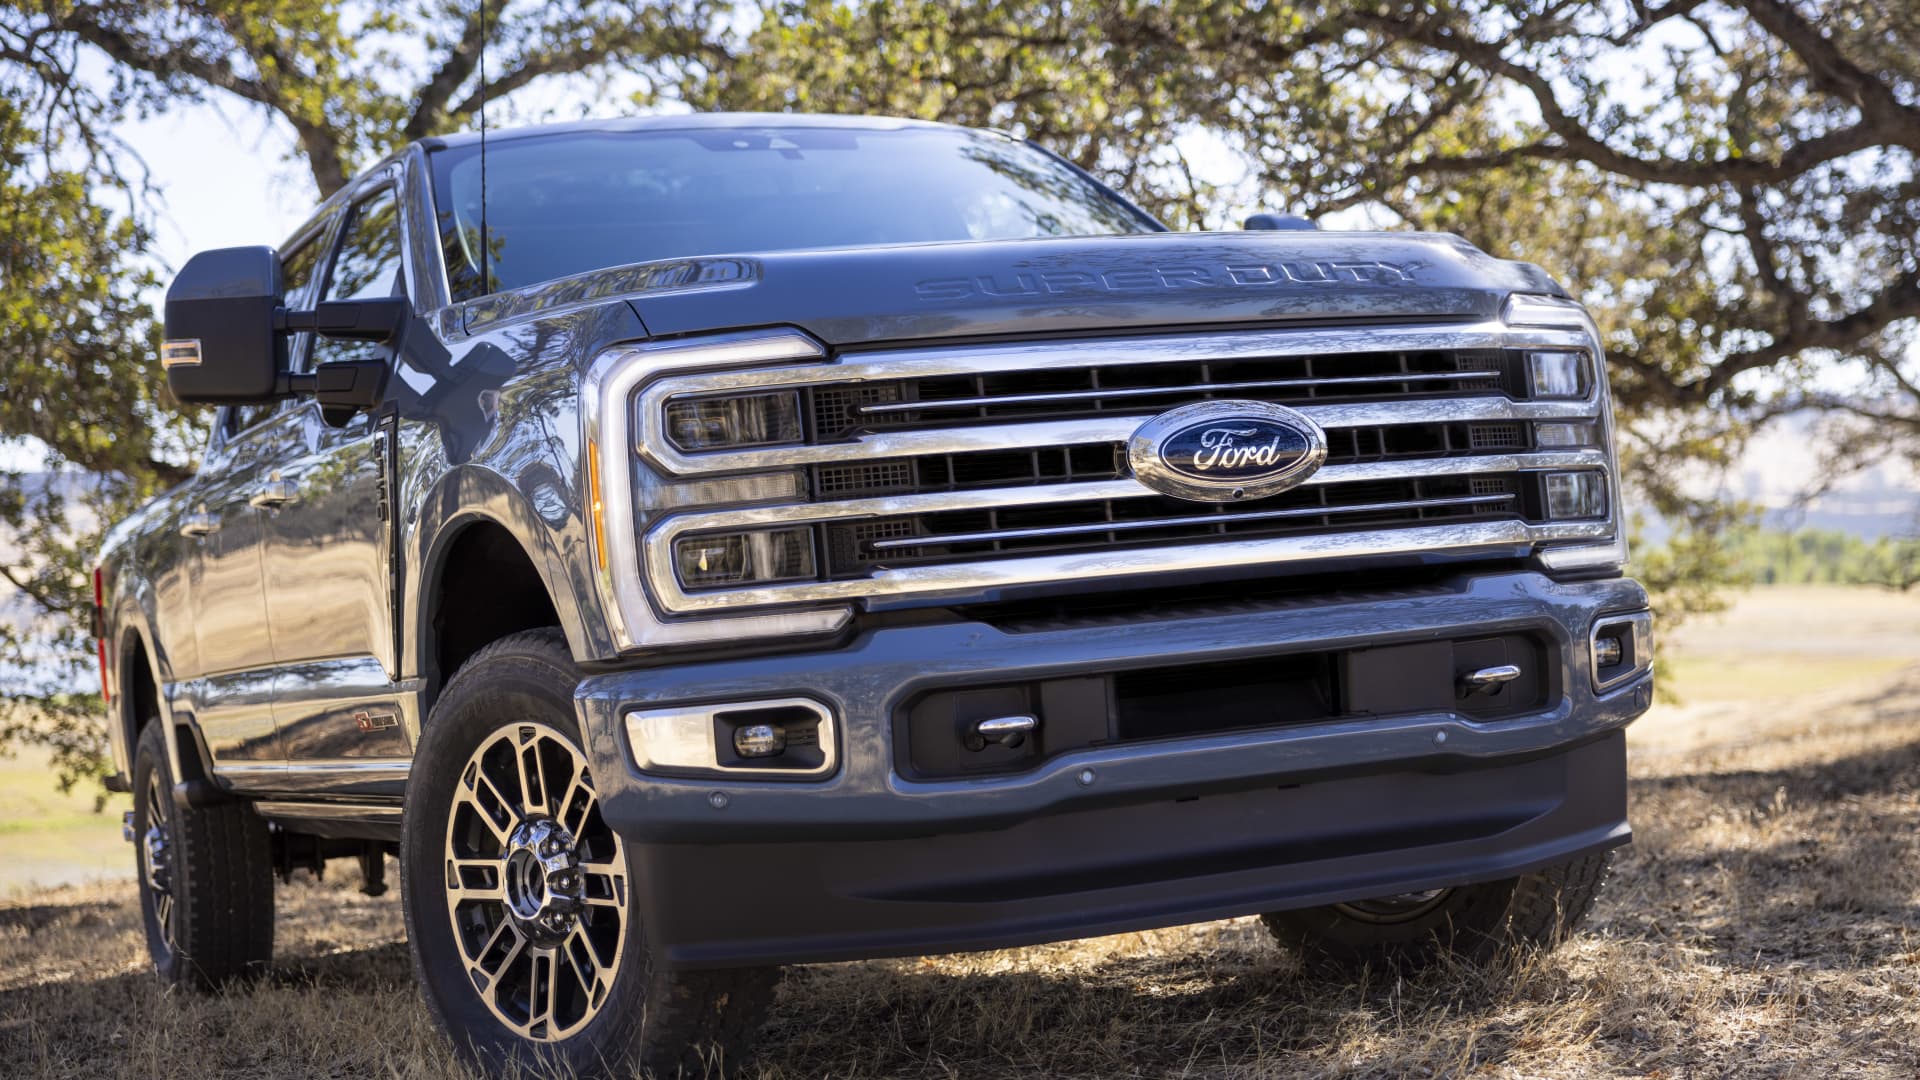 Ford pickup truck sales in December help narrow overall sales decline